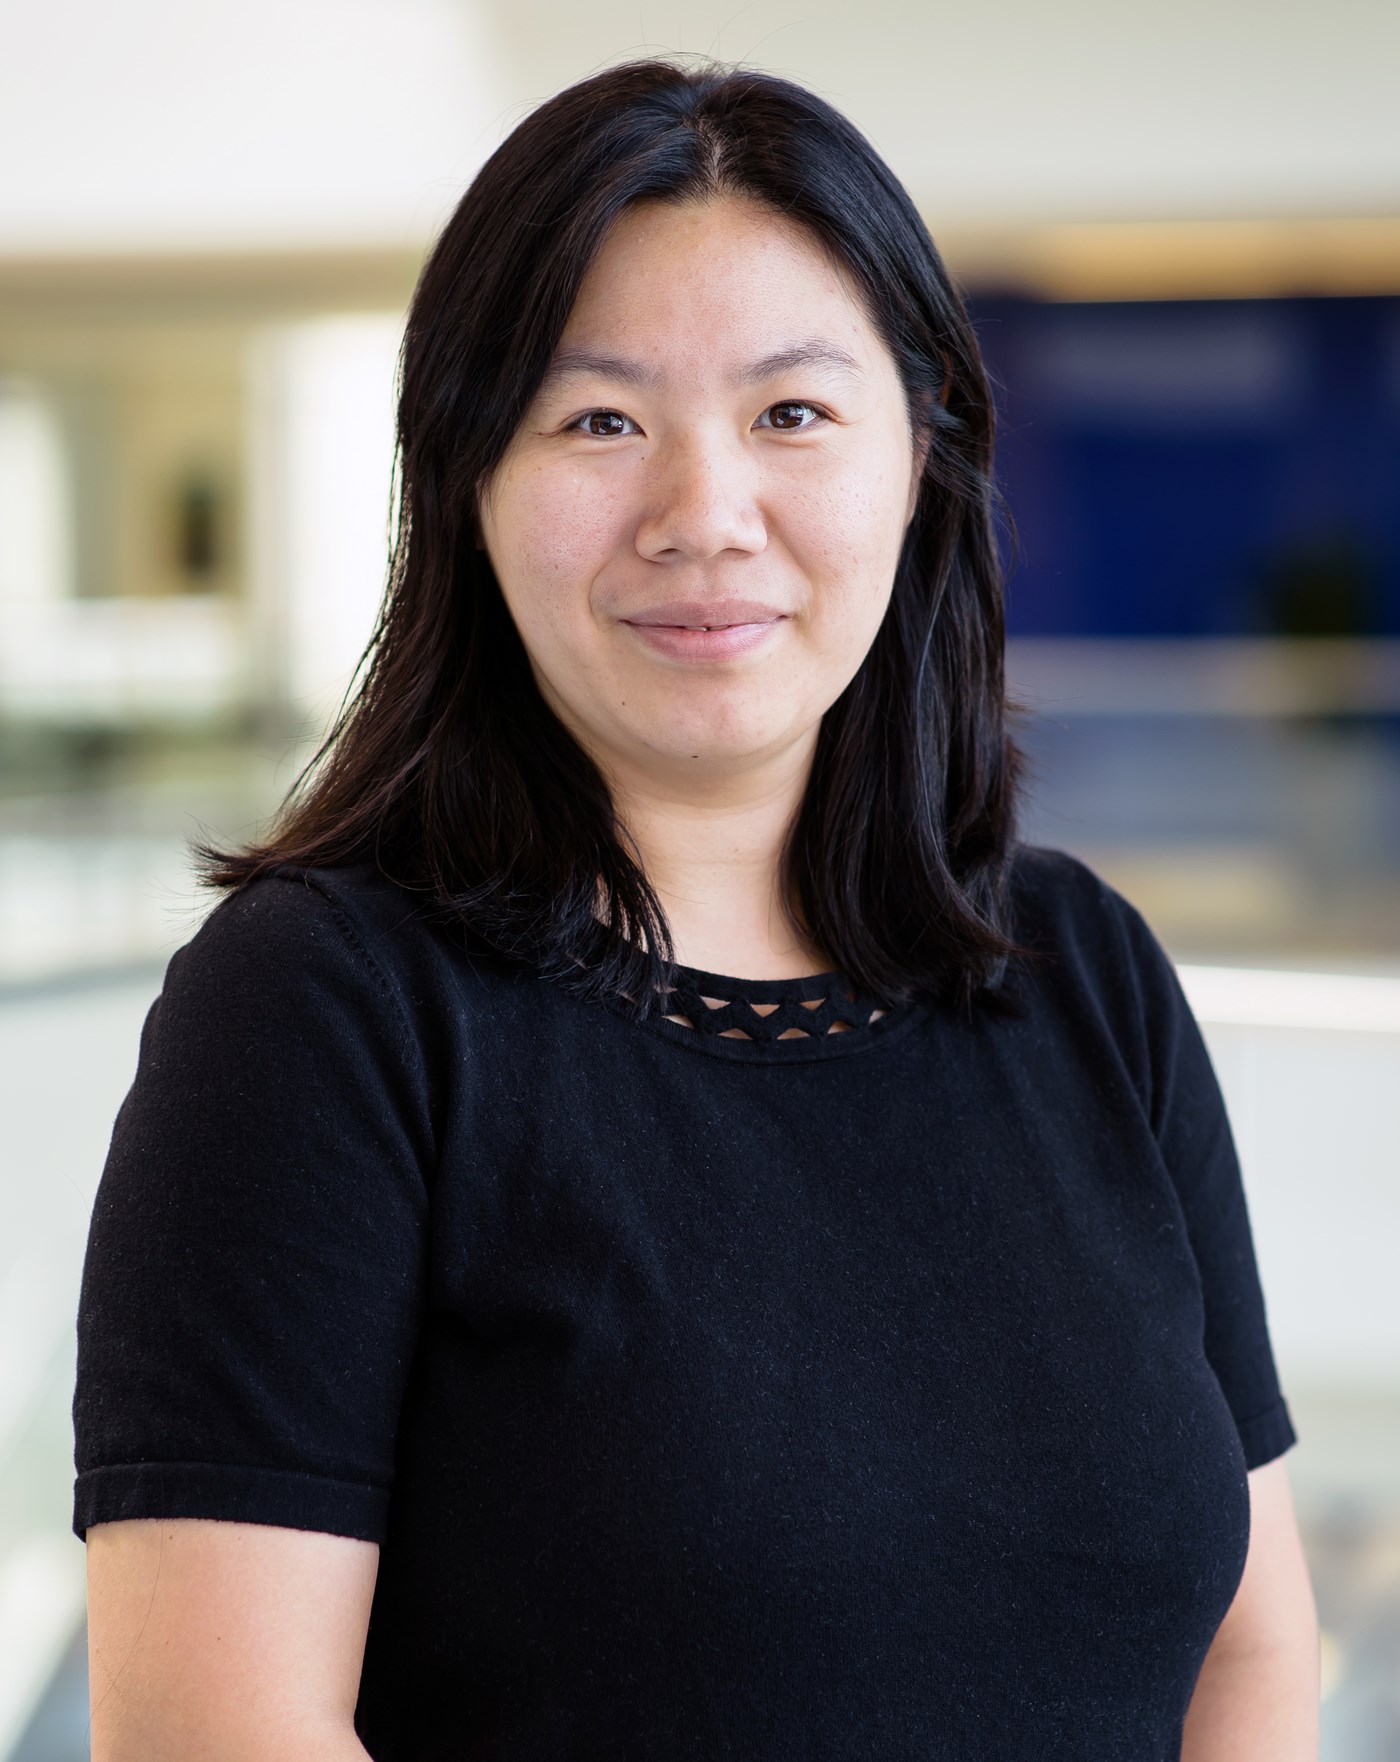 Fanglin Che is an Assistant Professor in the Chemical Engineering Department at UMass Lowell.